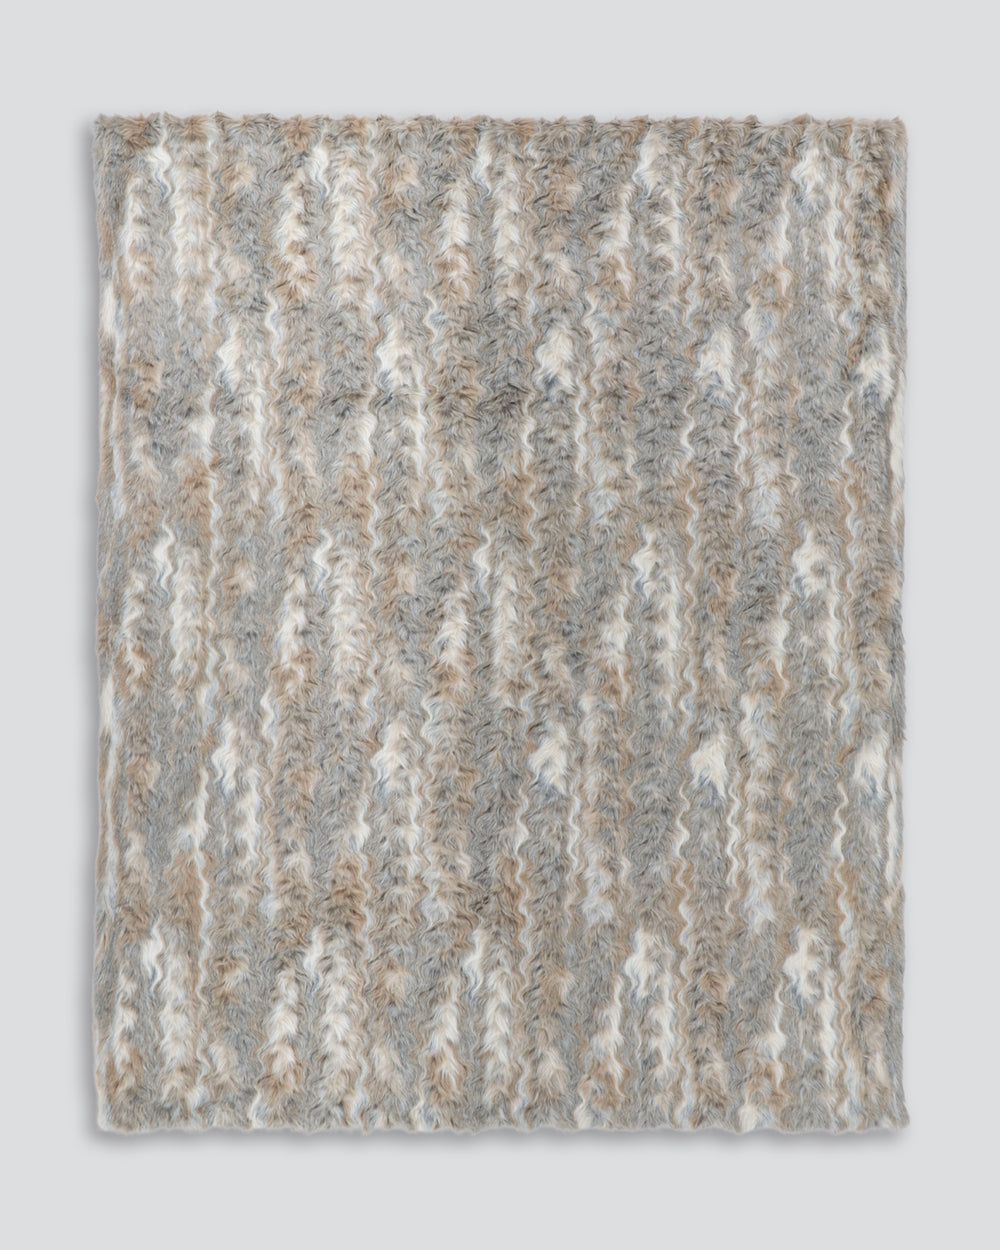 Heirloom Vintage Squirrel Grey Throw Rug Blanket in Faux Fur is available from Make Your House A Home Premium Stockist. Furniture Store Bendigo, Victoria. Australia Wide Delivery.